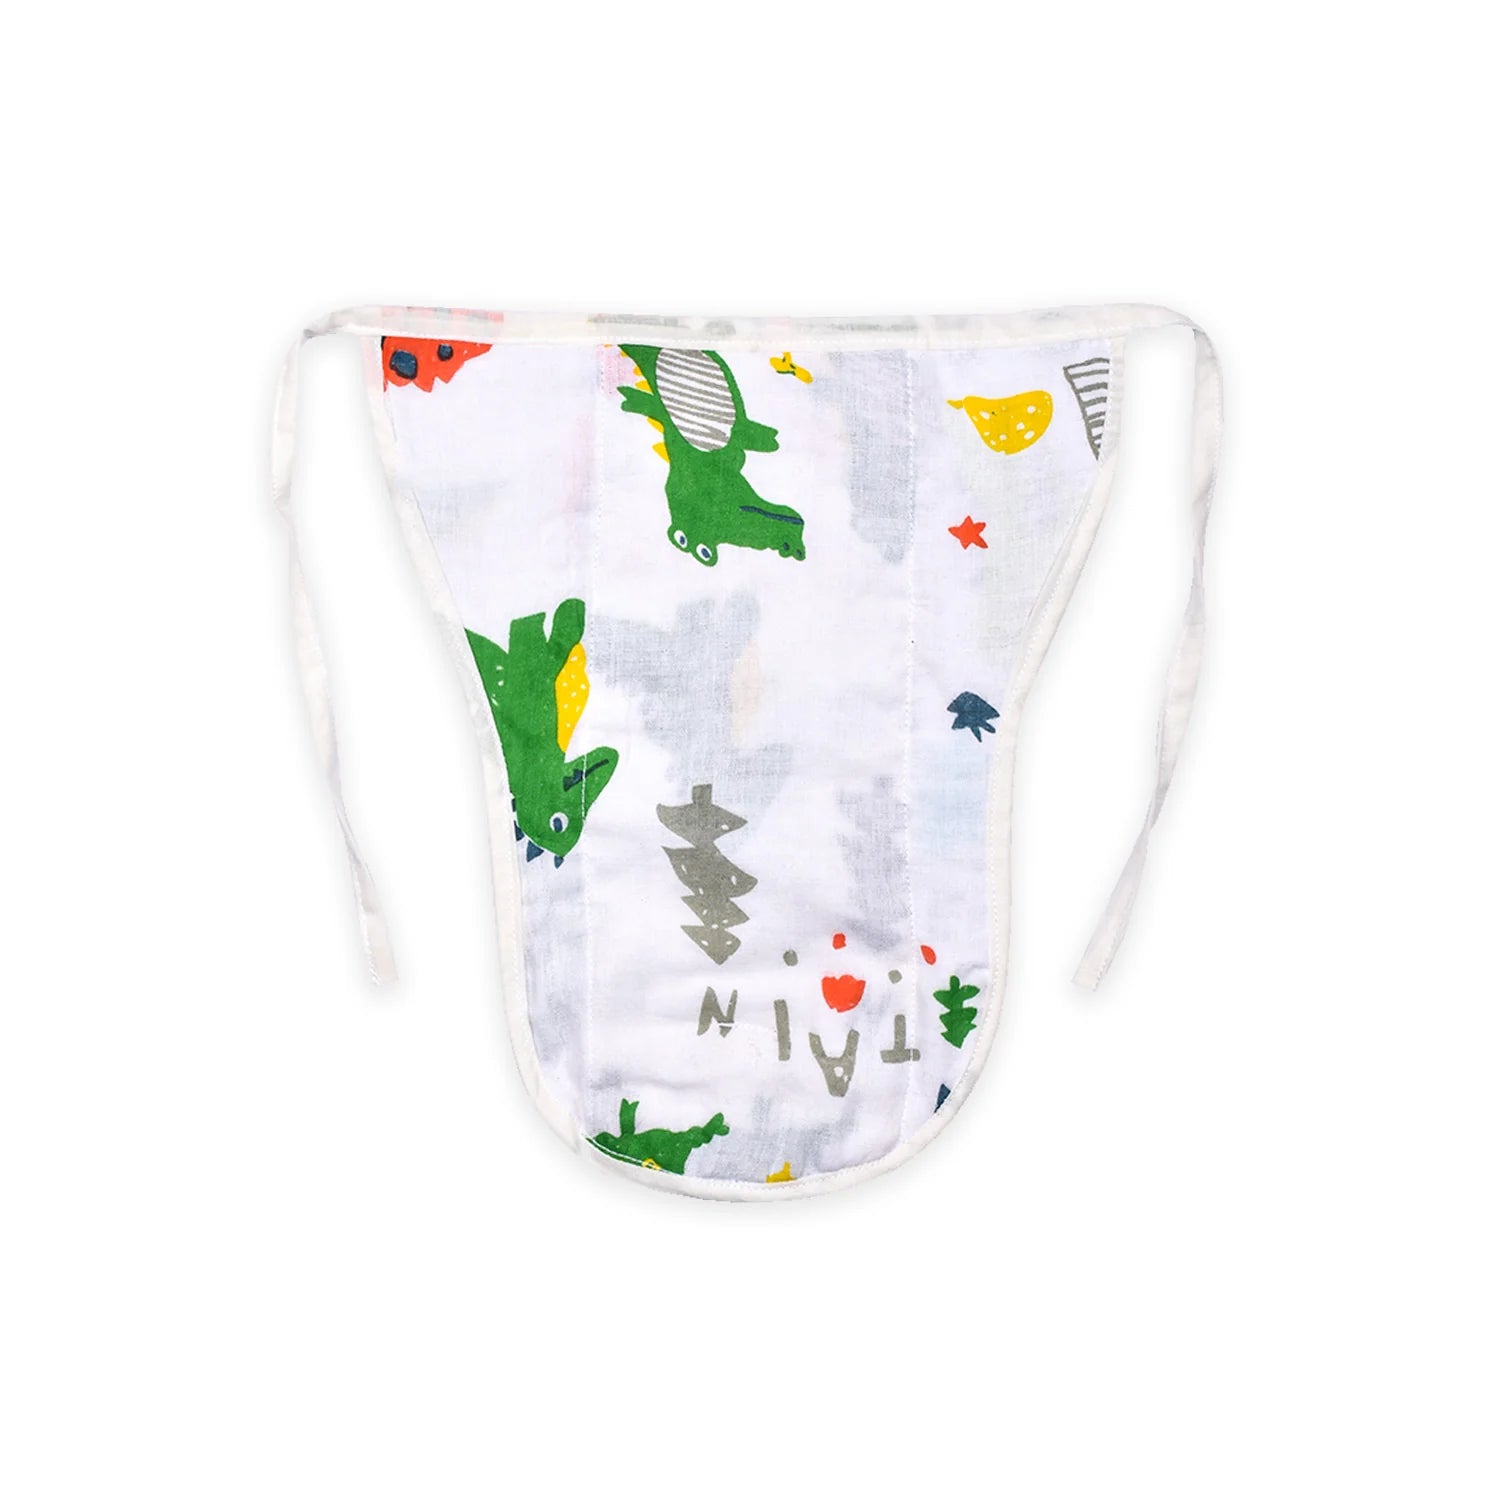 Baby Organic Cotton Printed Muslin Nappies Pack of - 5 | Mix Design